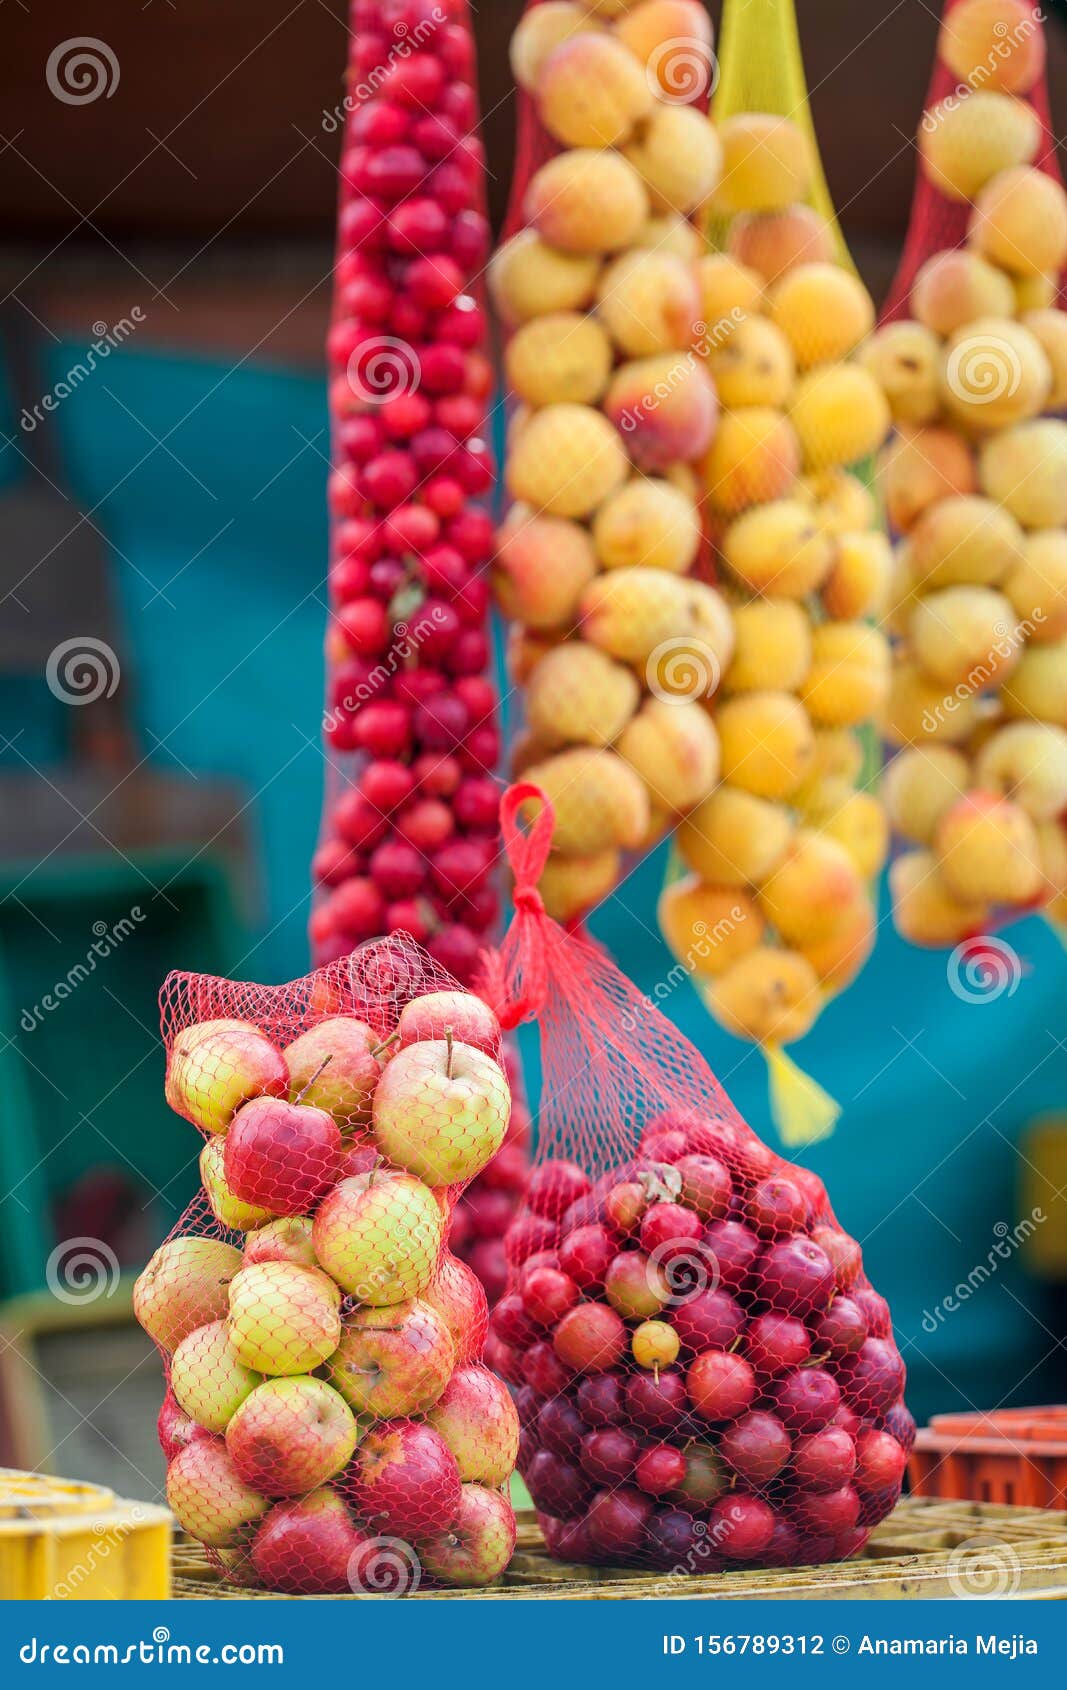 traditional sale of fruits on the roads of the department of boyacÃÂ¡ in colombia